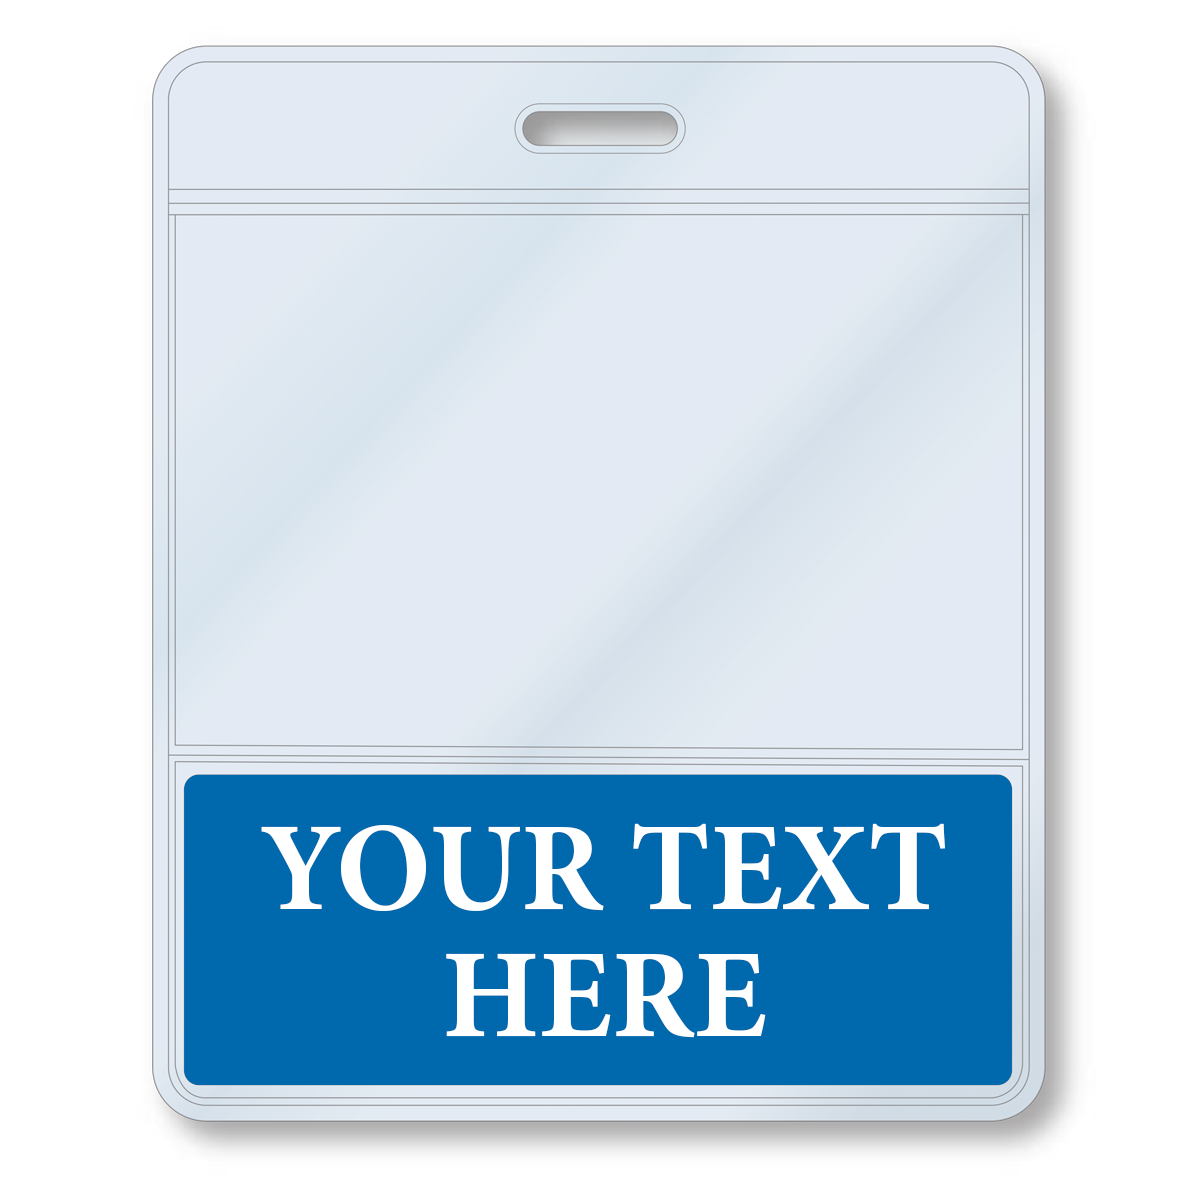 A Custom Printed BadgeBottoms® Horizontal (Badge Holder & Badge Buddy IN ONE) with a slot for a lanyard and the customizable title "YOUR TEXT HERE" in white letters on a blue background at the bottom.